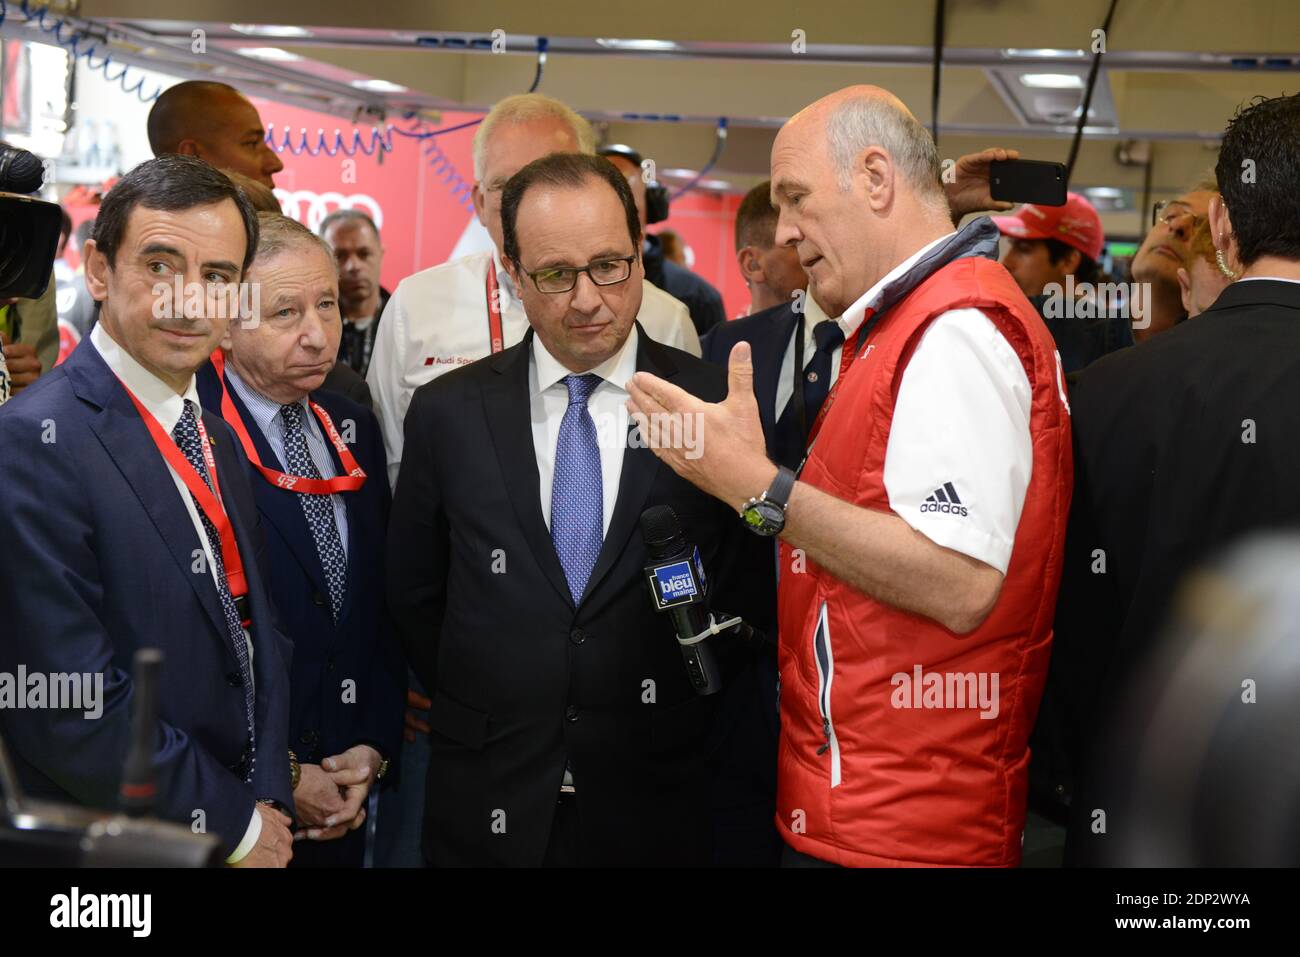 President of the Automobile Club de l’Ouest (ACO) Pierre Fillon, president of the International Auto Federation (FIA) Jean Todt, French President Francois Hollande, and head of Audi Motorsport Wolfgang Ullrich, visit the pit lane prior to the start of the 83rd Le Mans 24 Hours endurance race, in Le Mans, western France, on June 13, 2015. Photo by Guy Durand/ABACAPRESS.COM Stock Photo